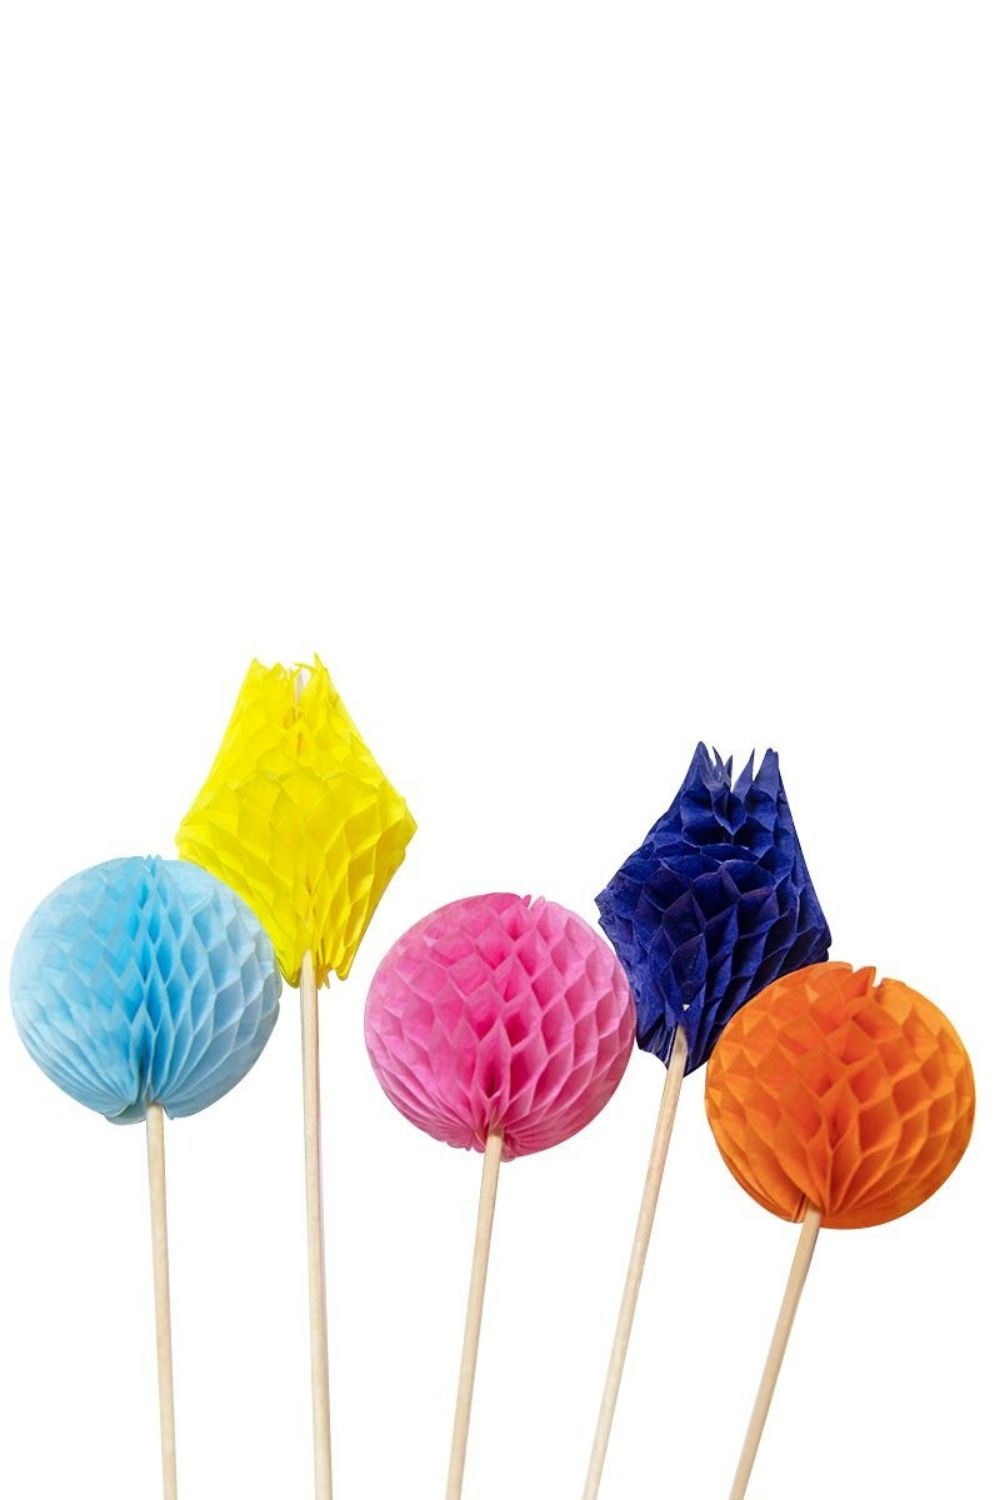 HONEYCOMB CAKE TOPPER 5PC